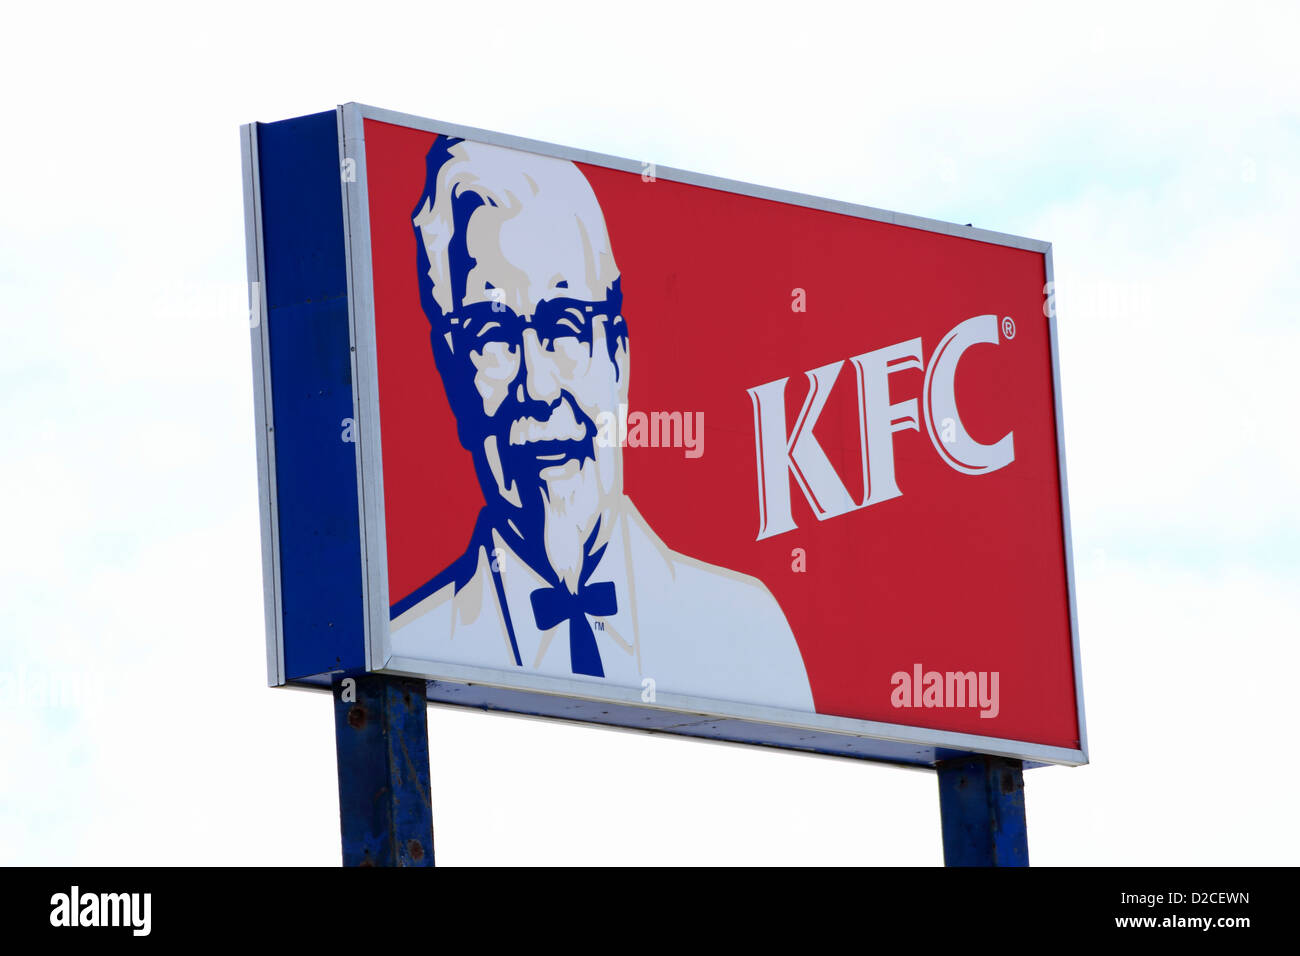 Colonel Sanders KFC Kentucky Fried Chicken store sign Stock Photo